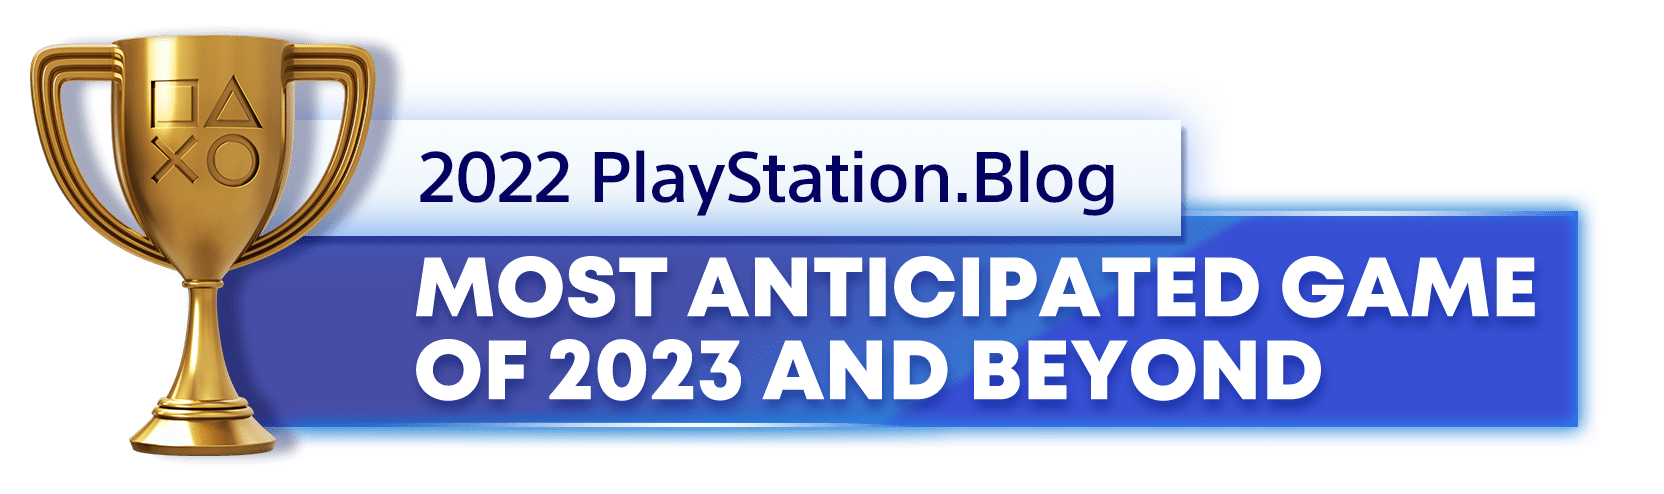 PlayStation Stars New Challenges and Awards